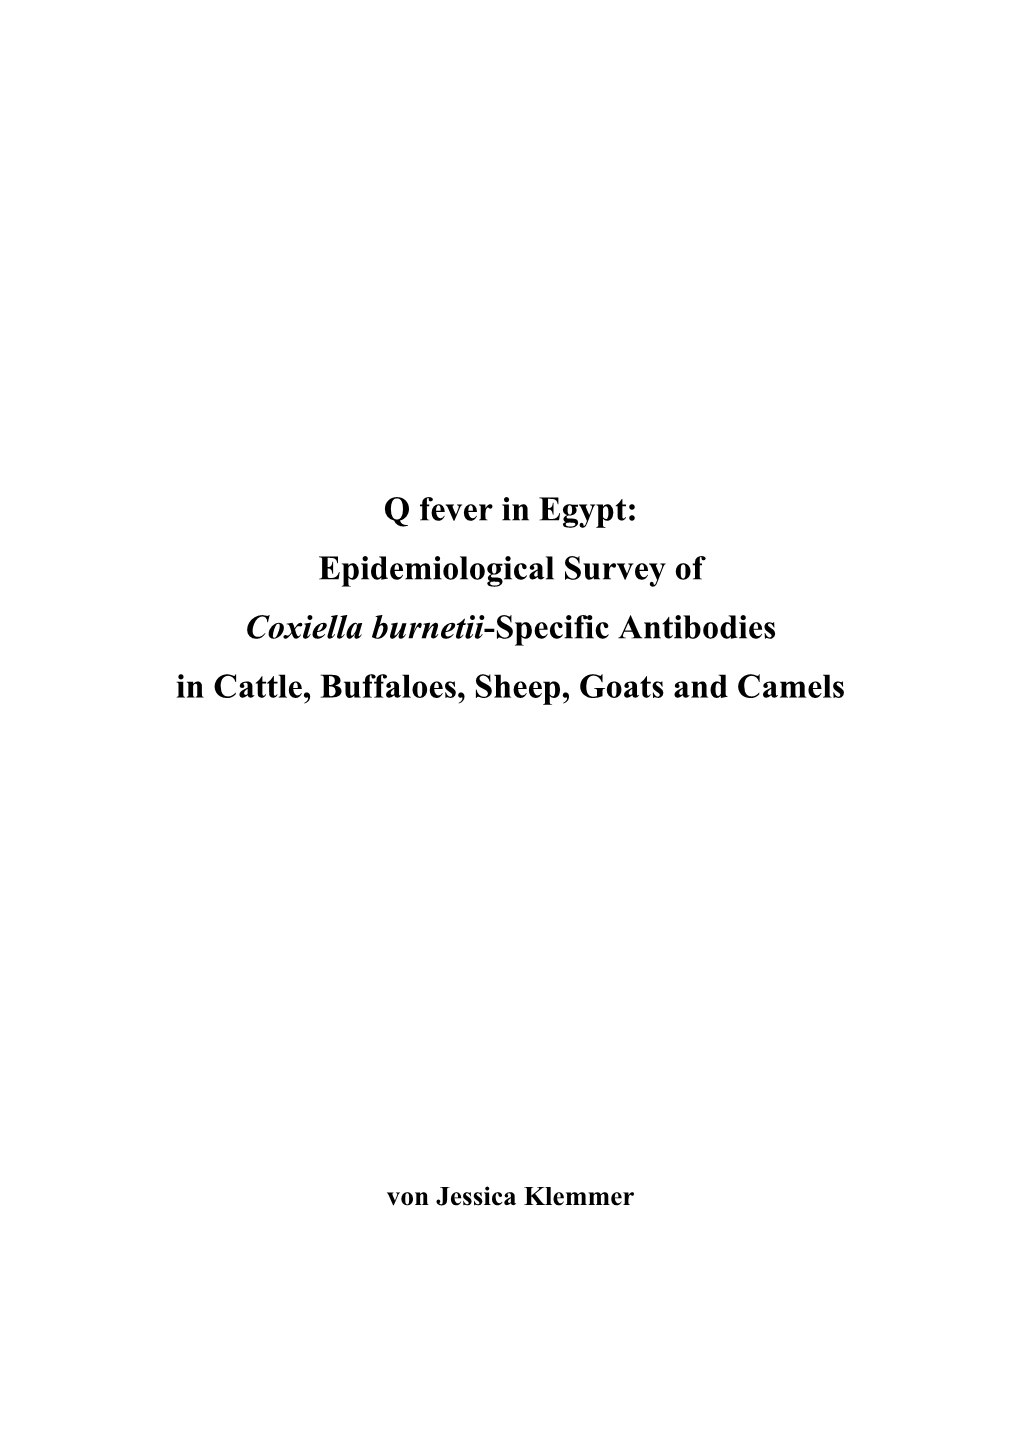 Q Fever in Egypt: Epidemiological Survey of Coxiella Burnetii-Specific Antibodies in Cattle, Buffaloes, Sheep, Goats and Camels